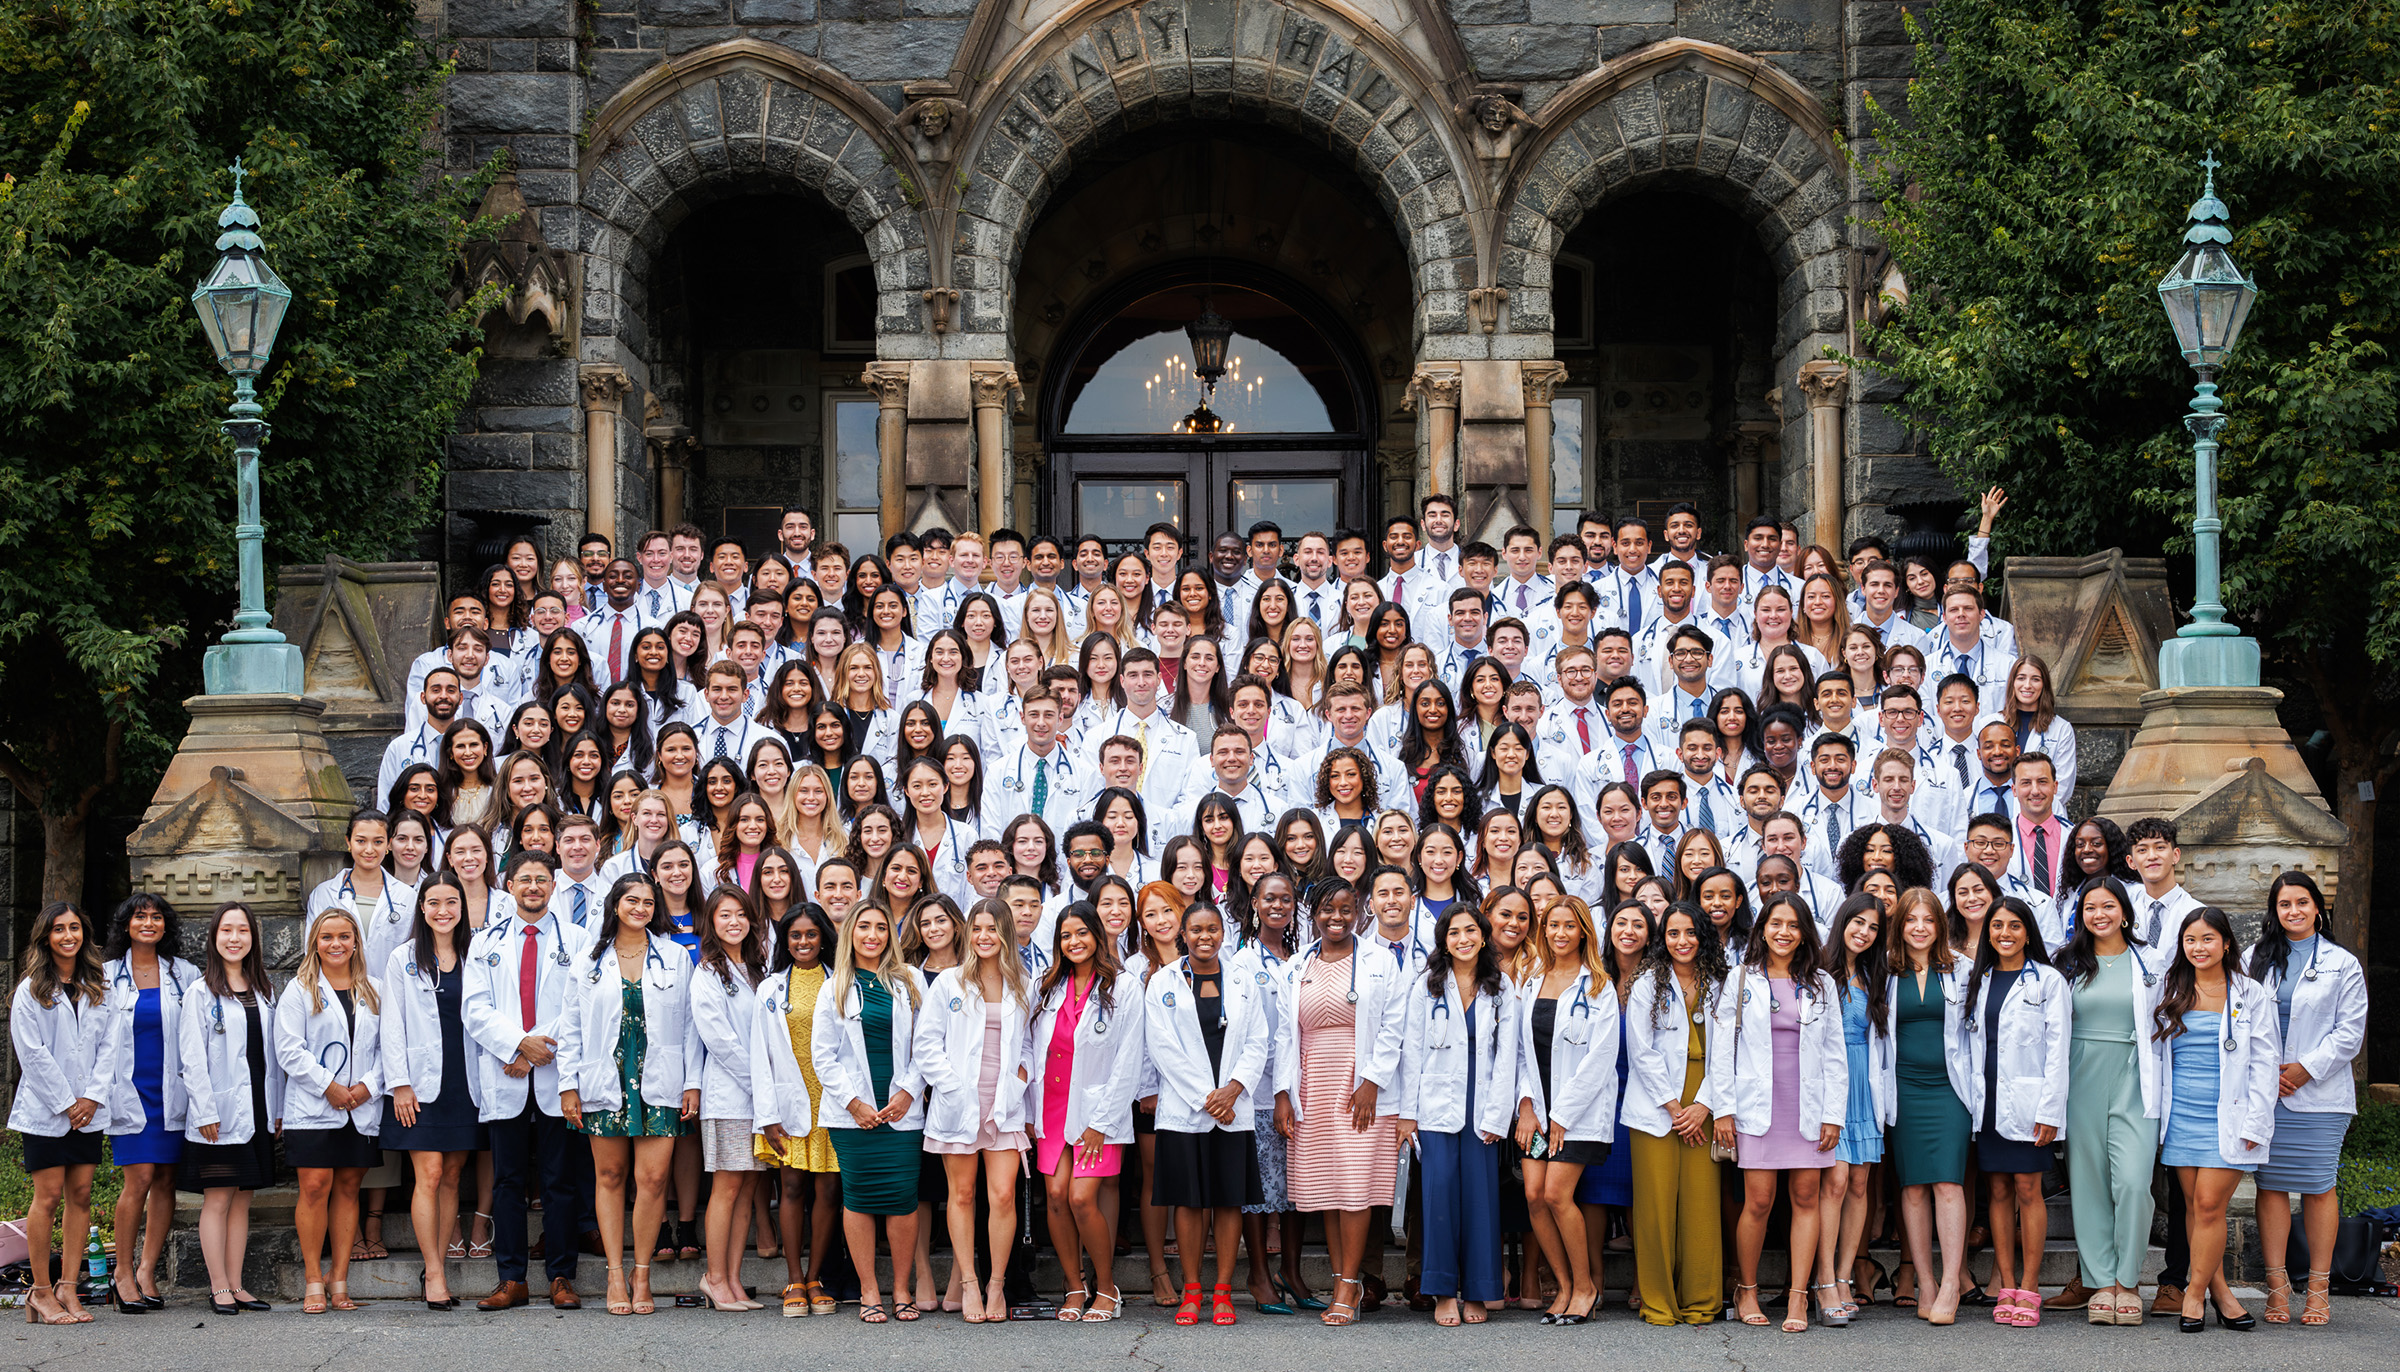 The Class of 2027 stands as a group in their white coats on the steps of Healy Hall